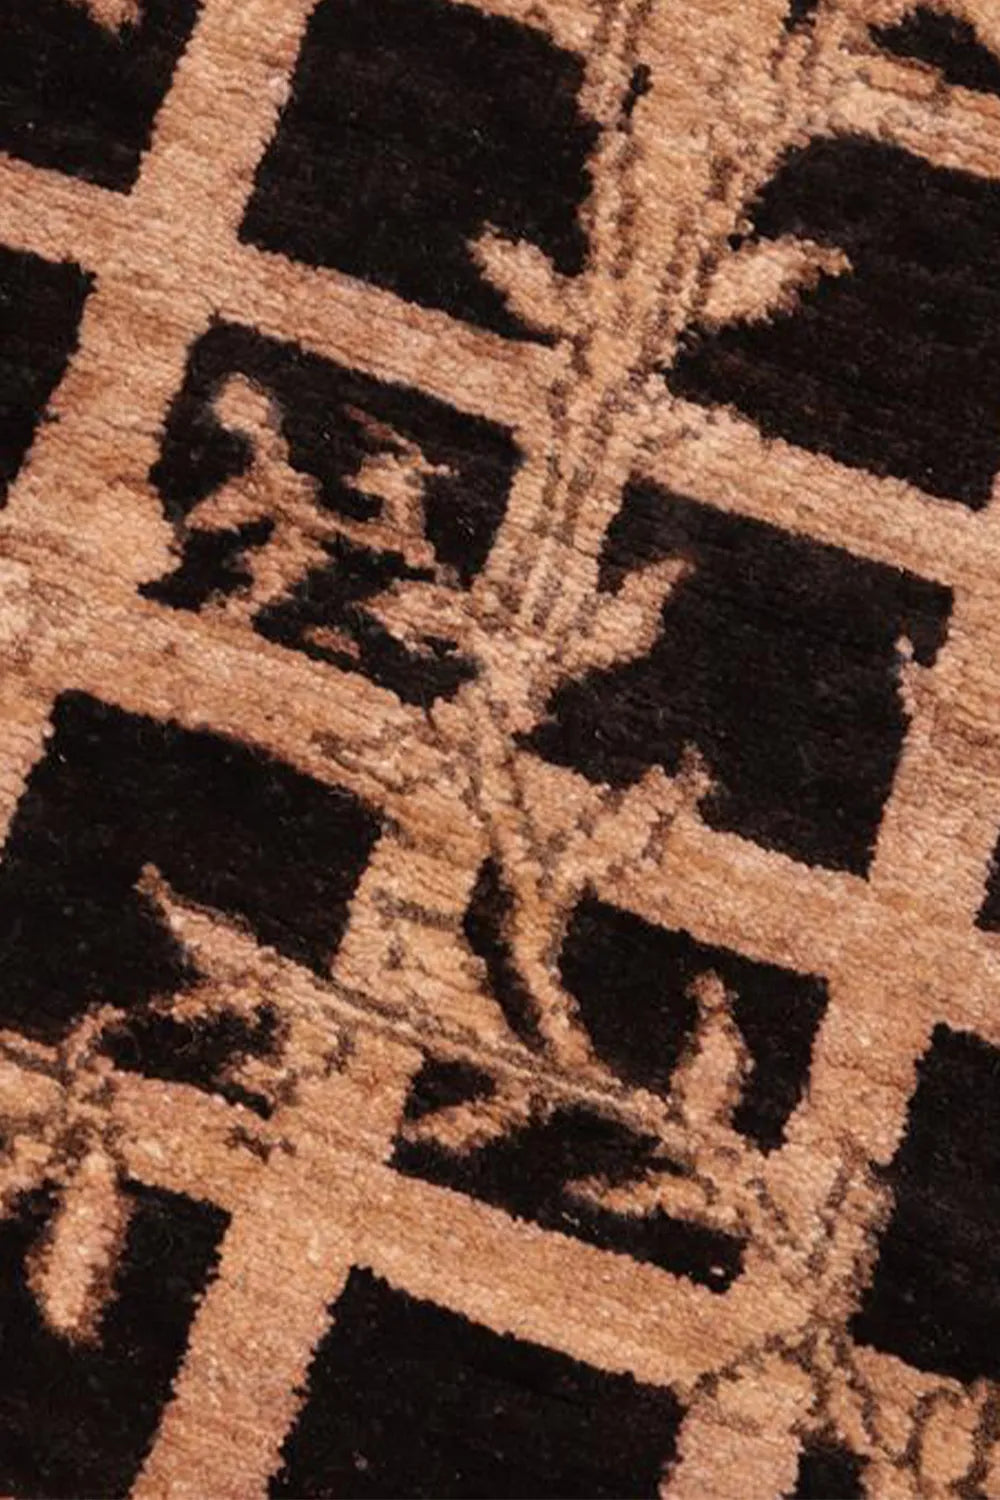 custom-sized black and gold rug, handwoven for a personalized interior design